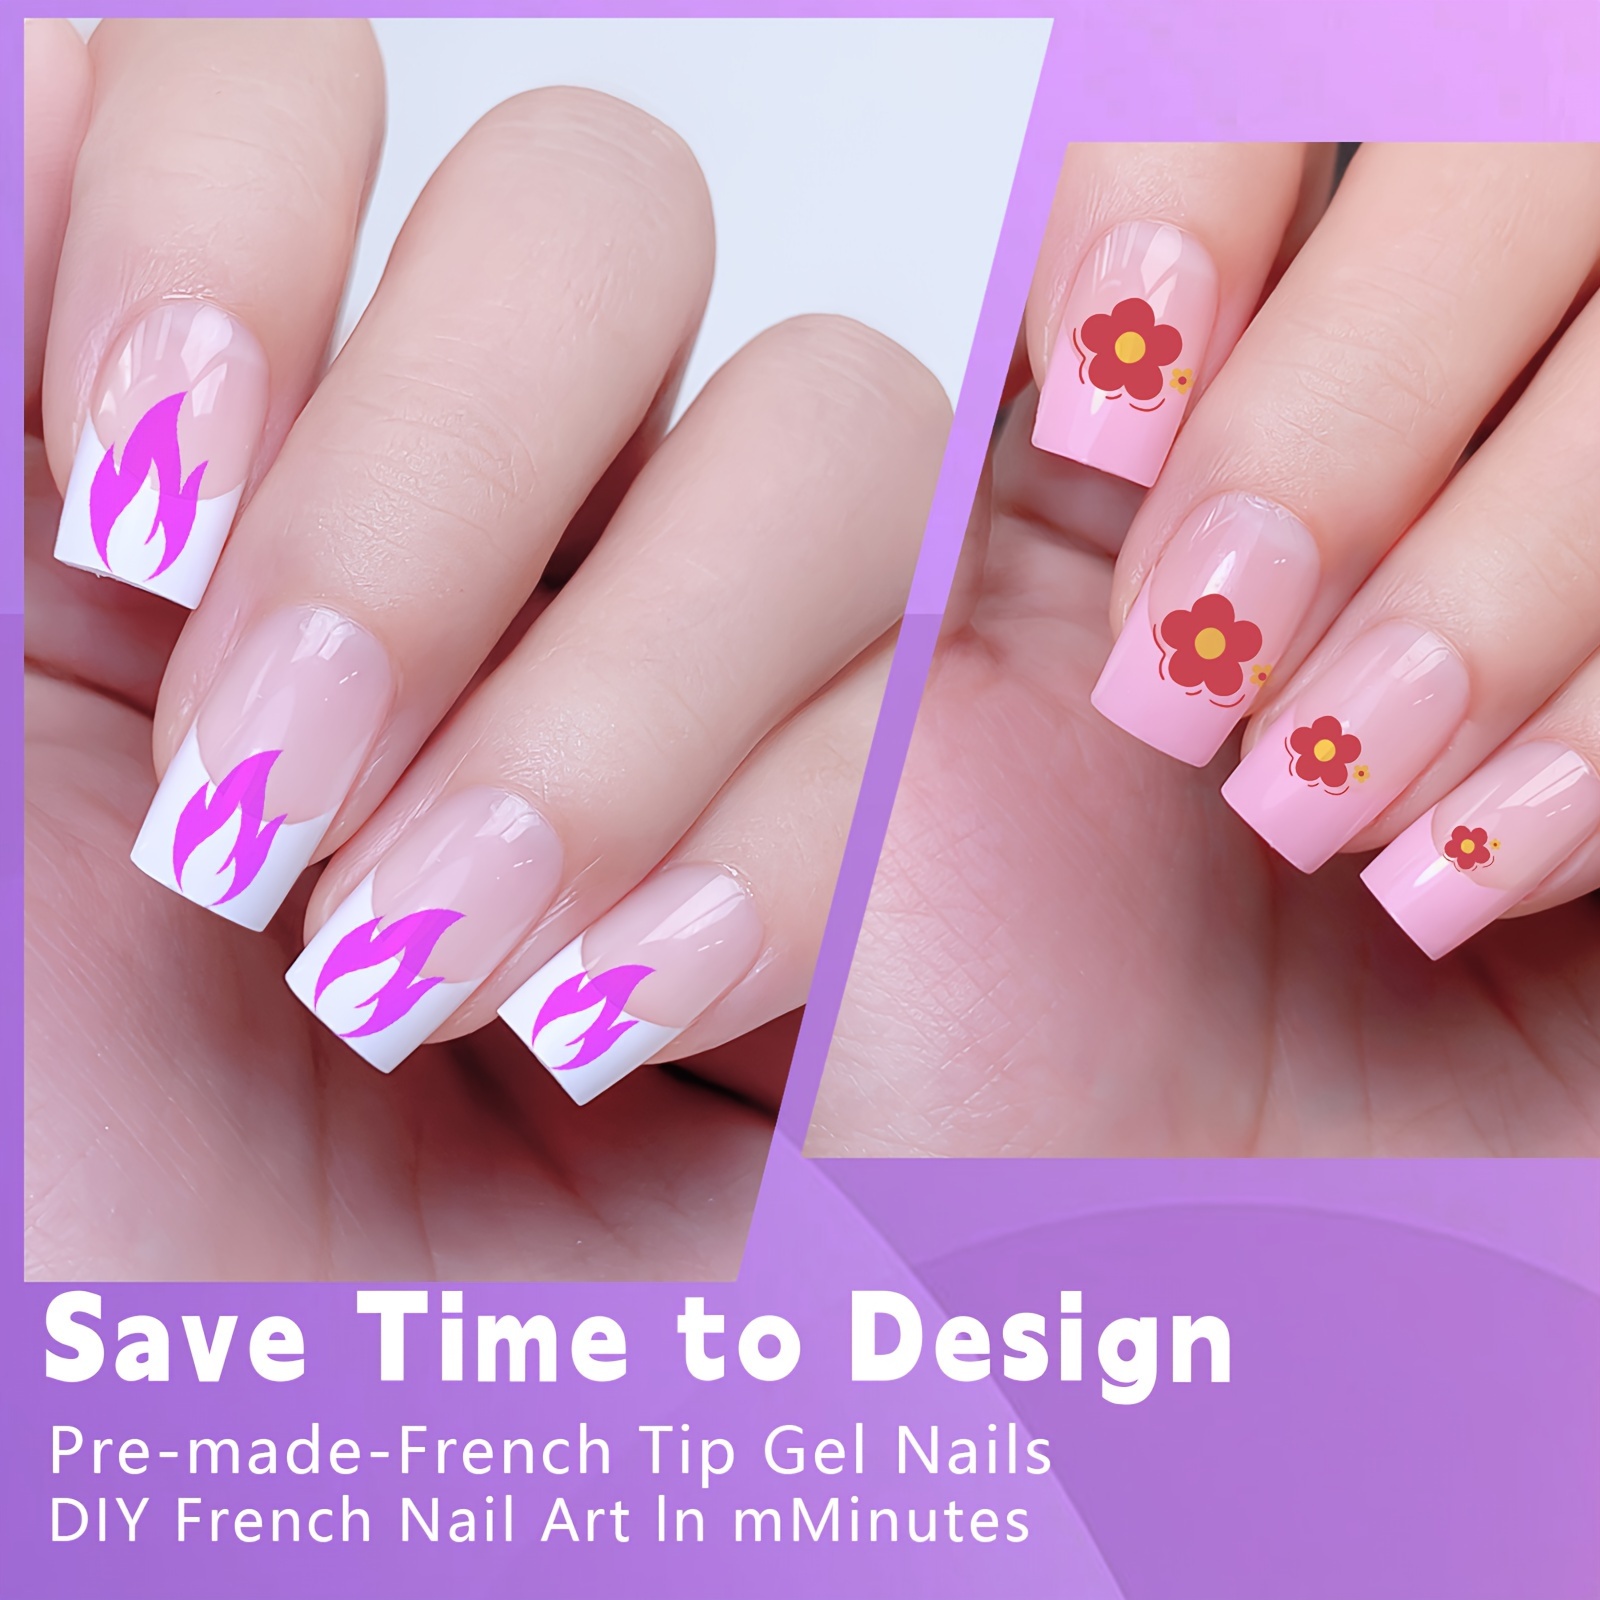 Why have french nail extensions design been famous and in trend? by  stylebets - Issuu